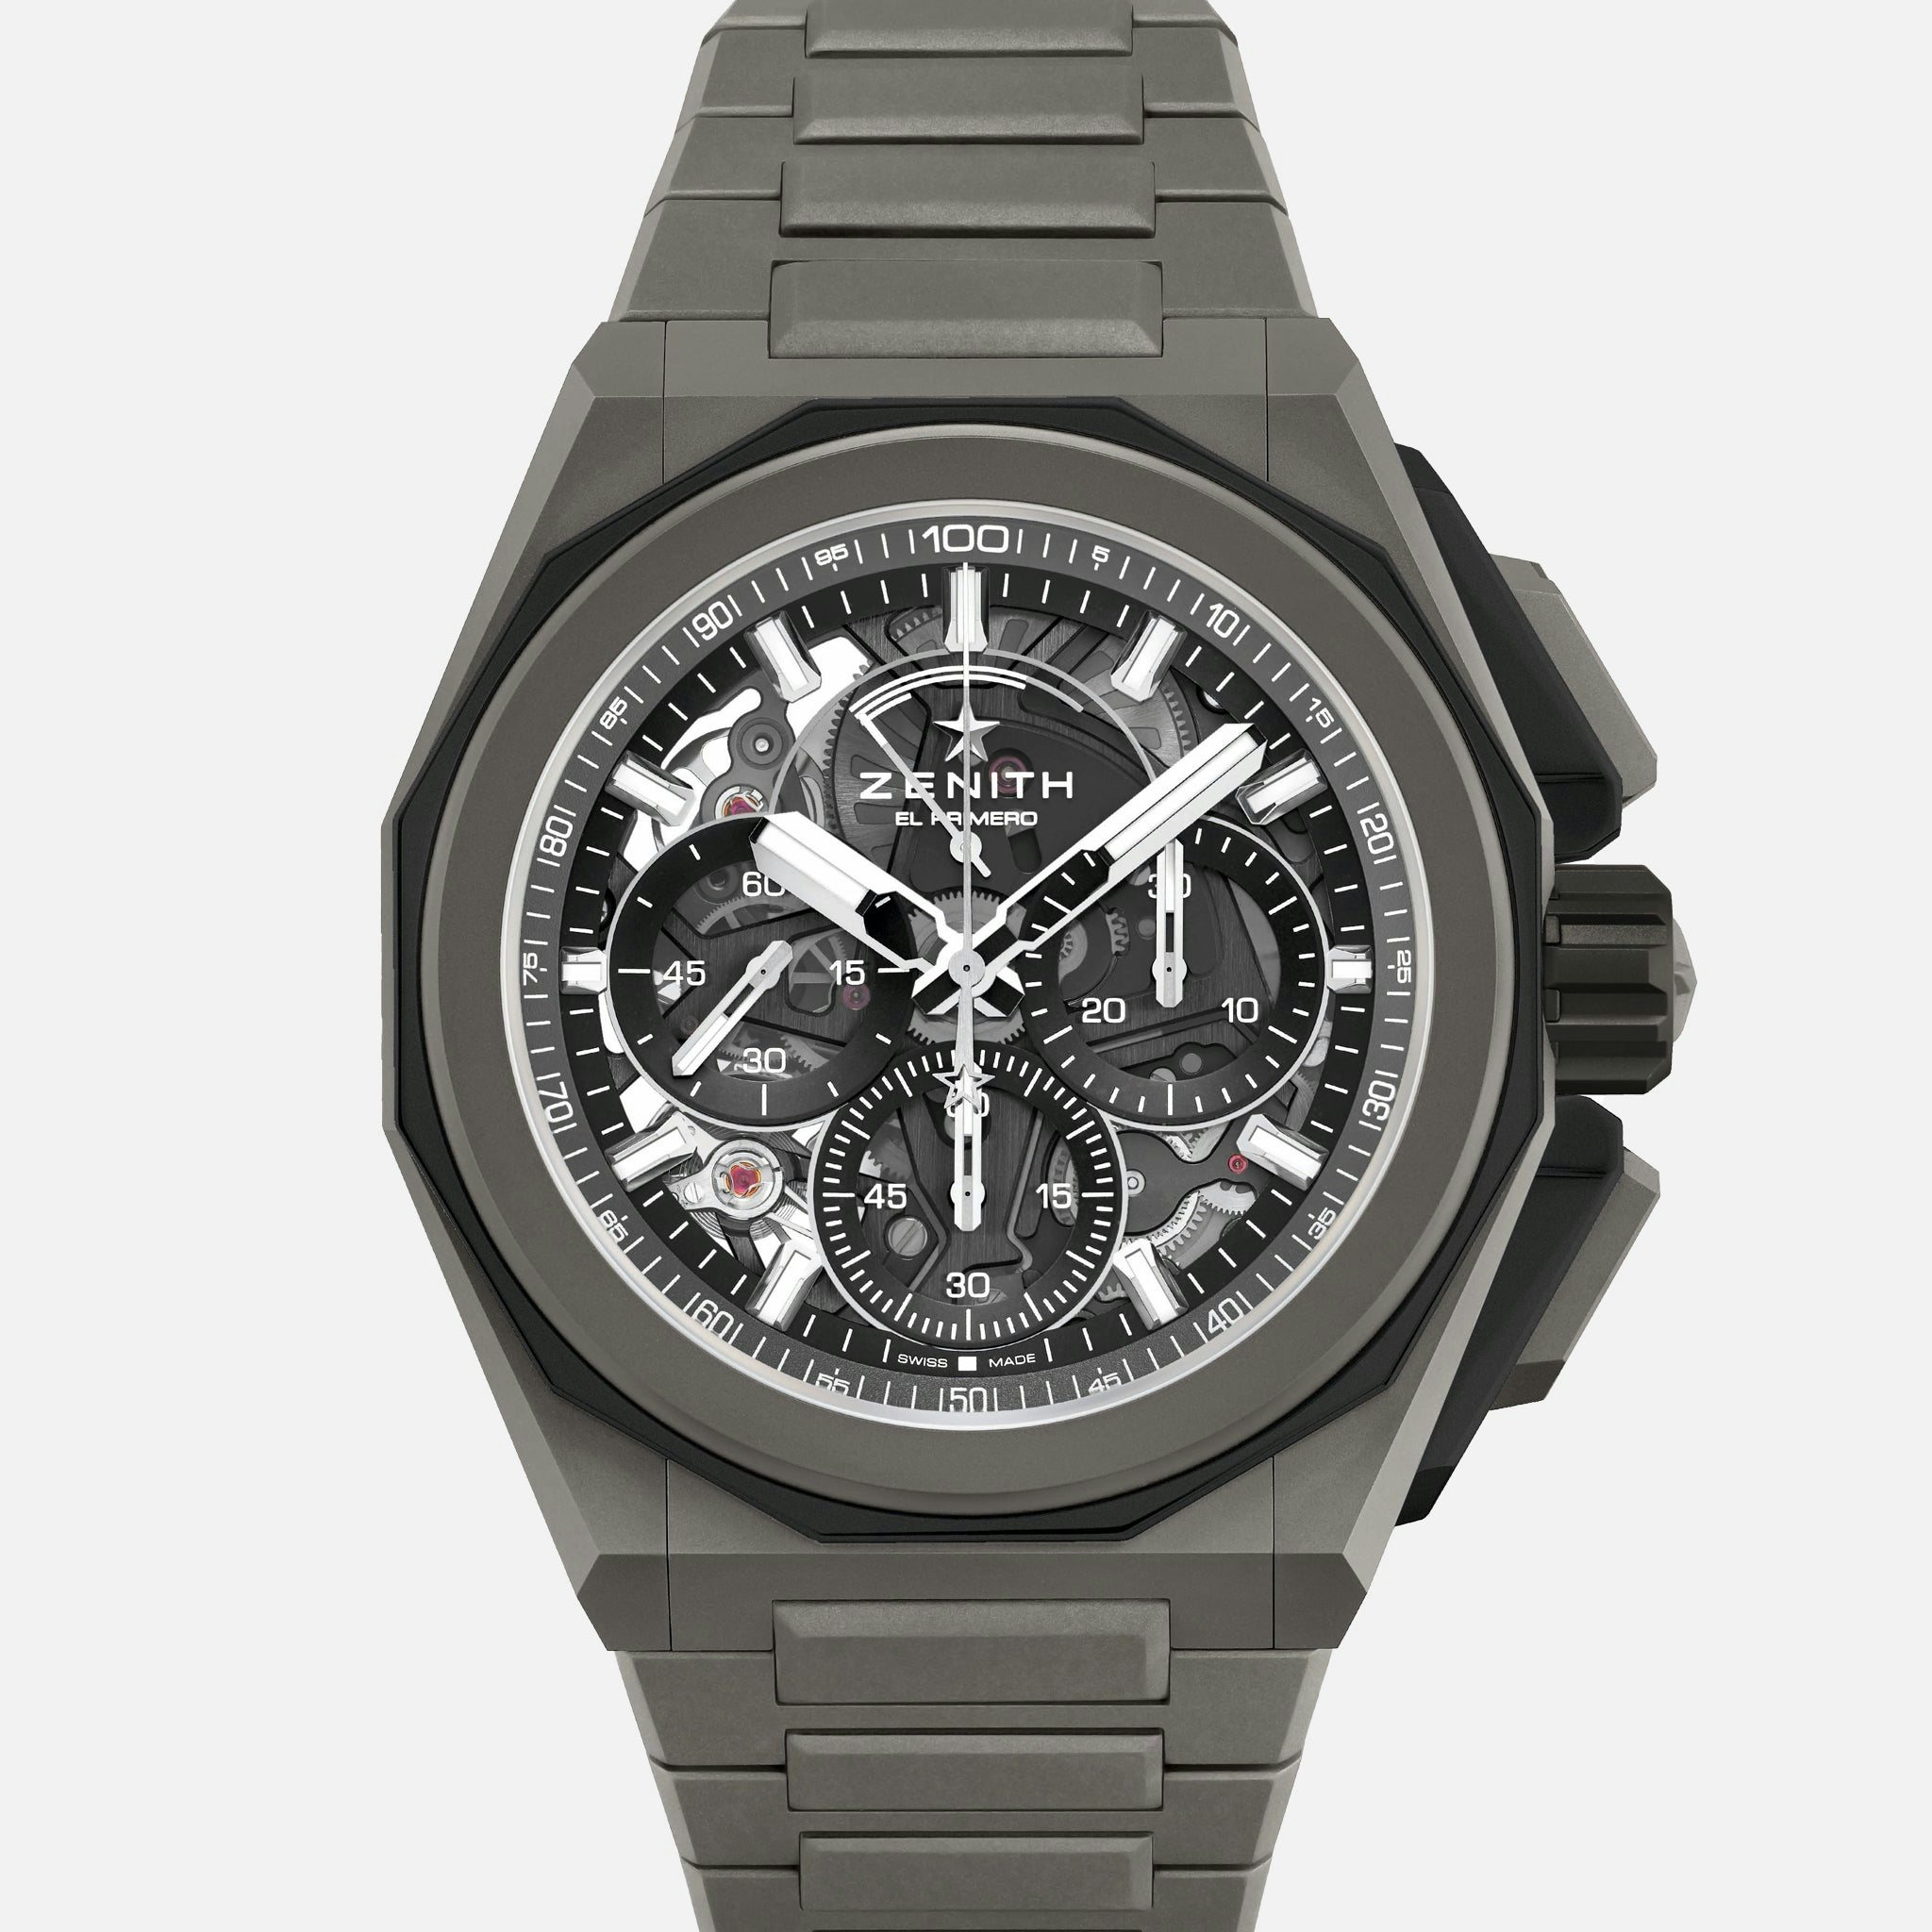 Defy Extreme Chronograph With Black Dial In Titanium – HODINKEE Shop